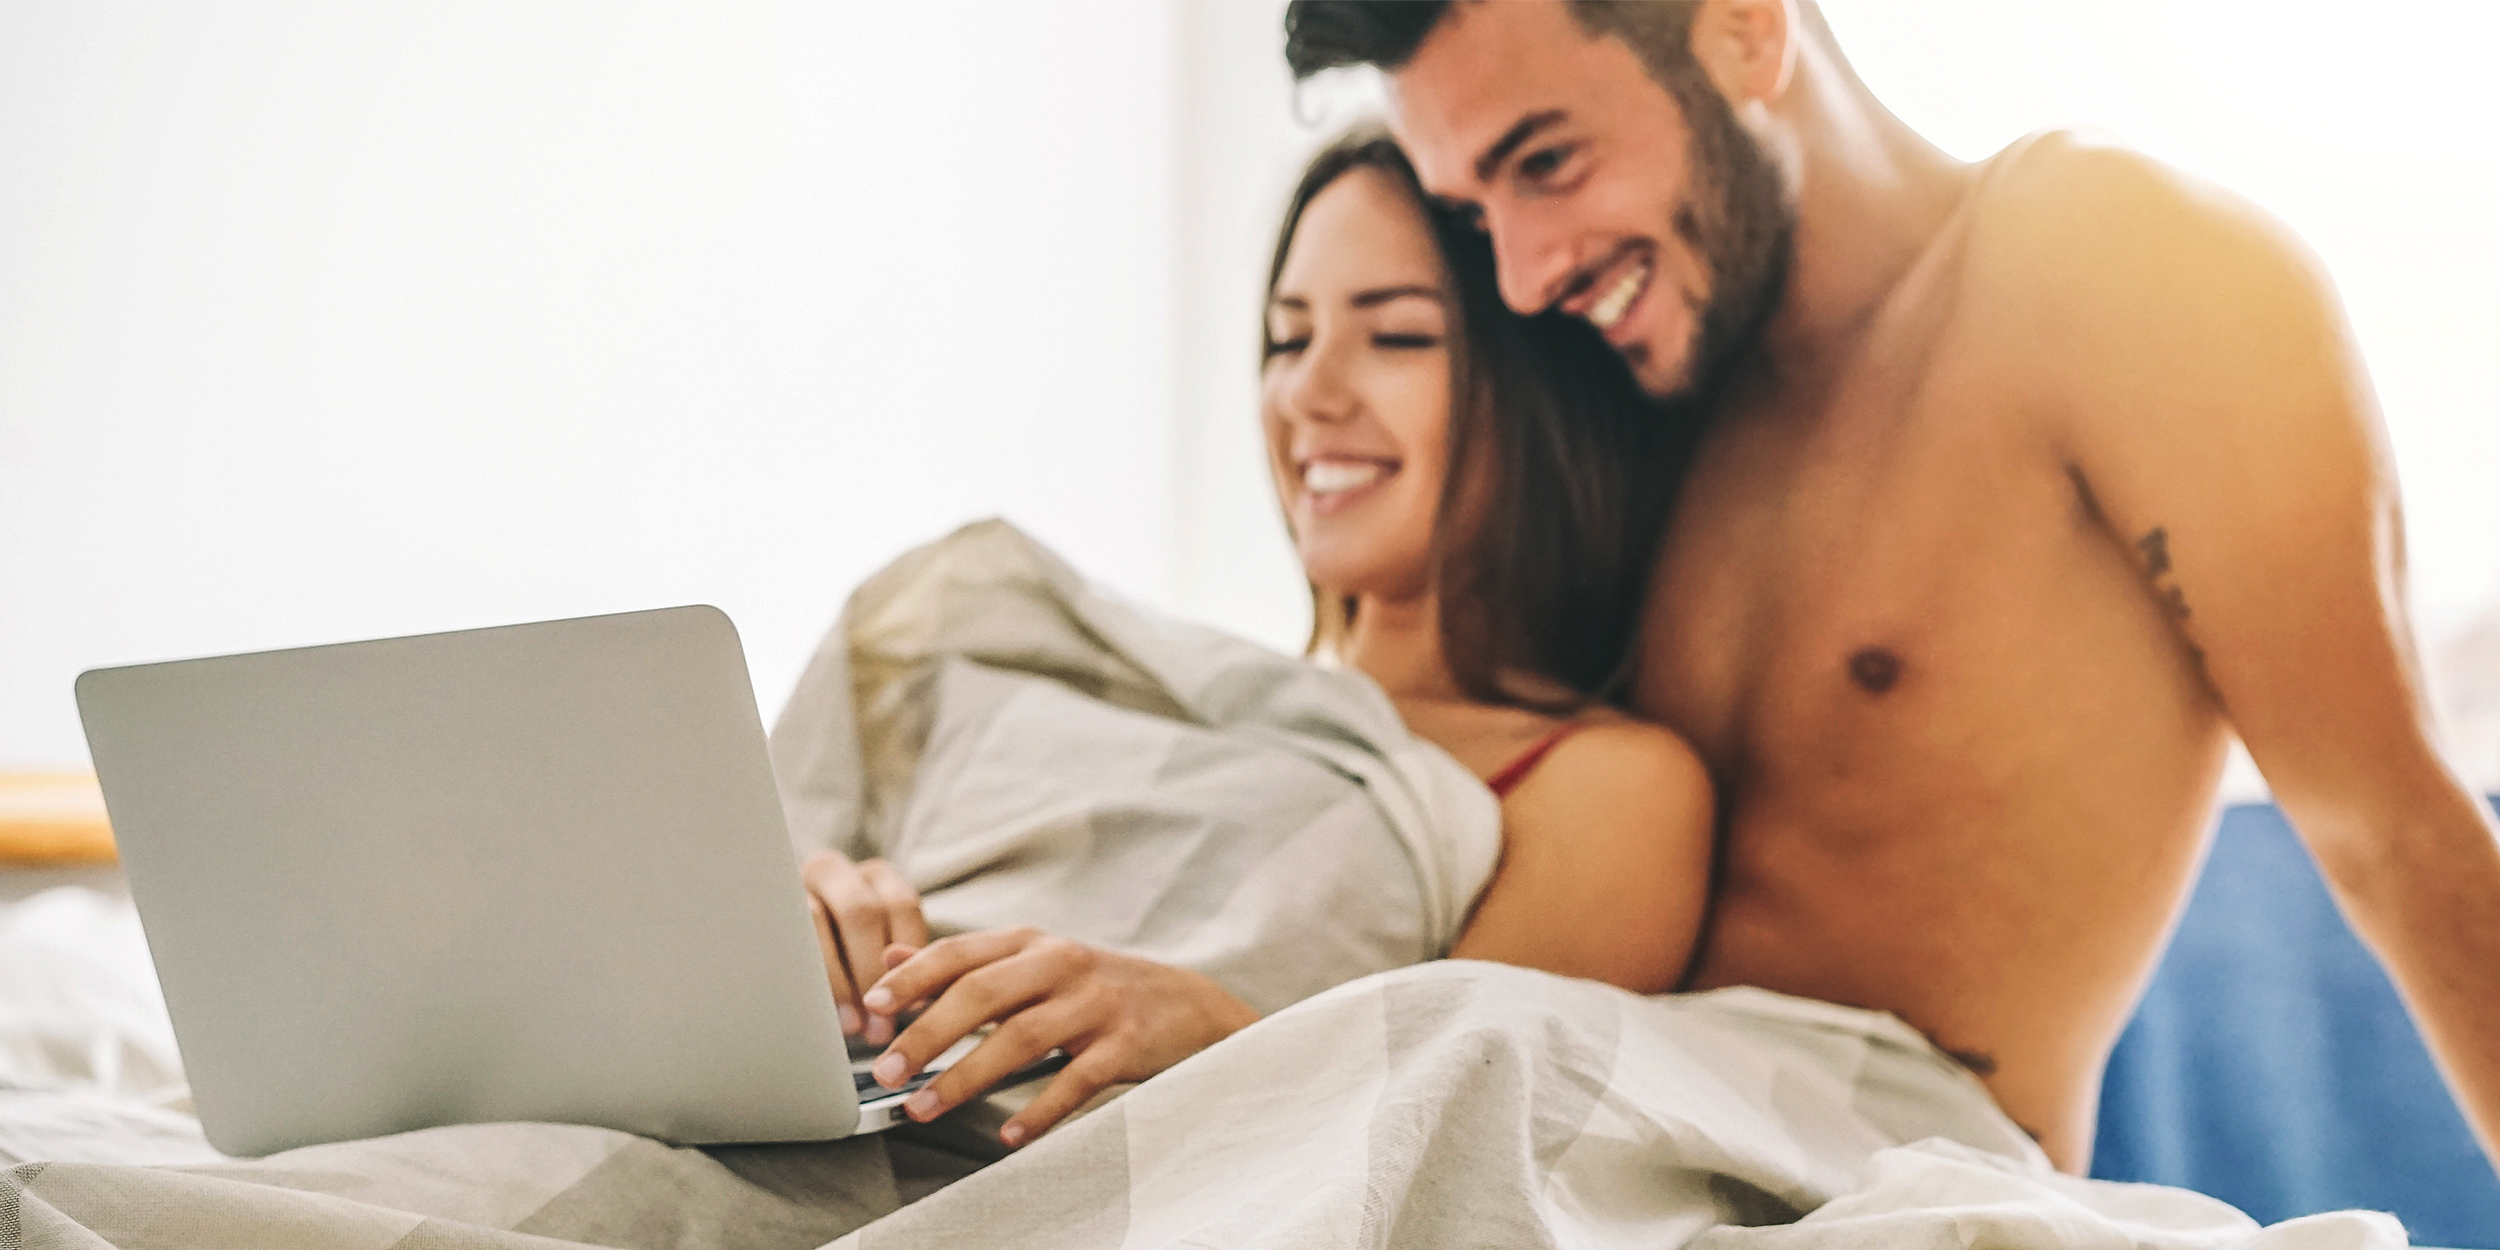 Porn For Couples The Best Couple Porn to Watch and Explore Together